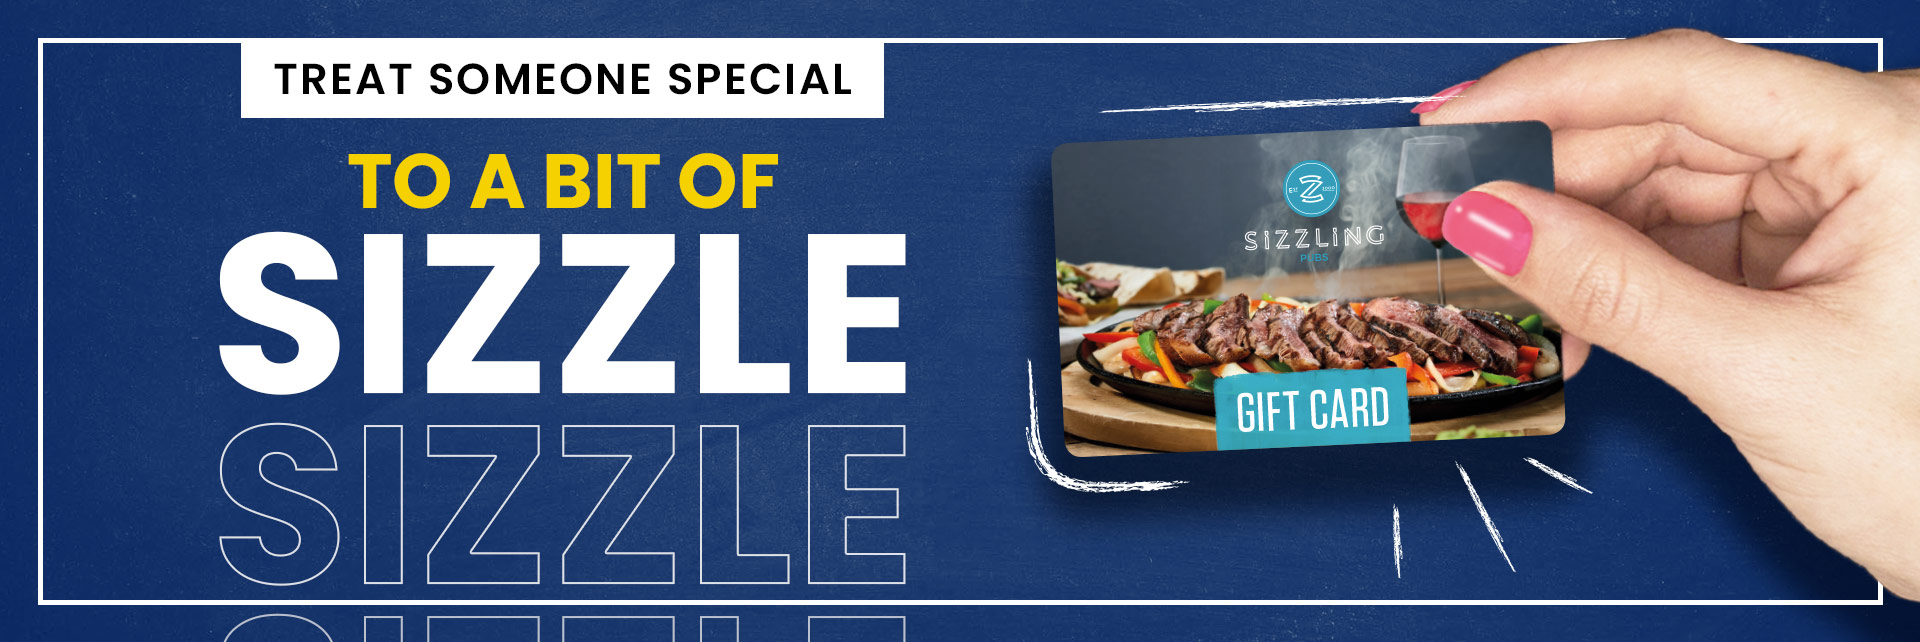 Sizzling Pubs Gift Card at The Woodcock in Leeds